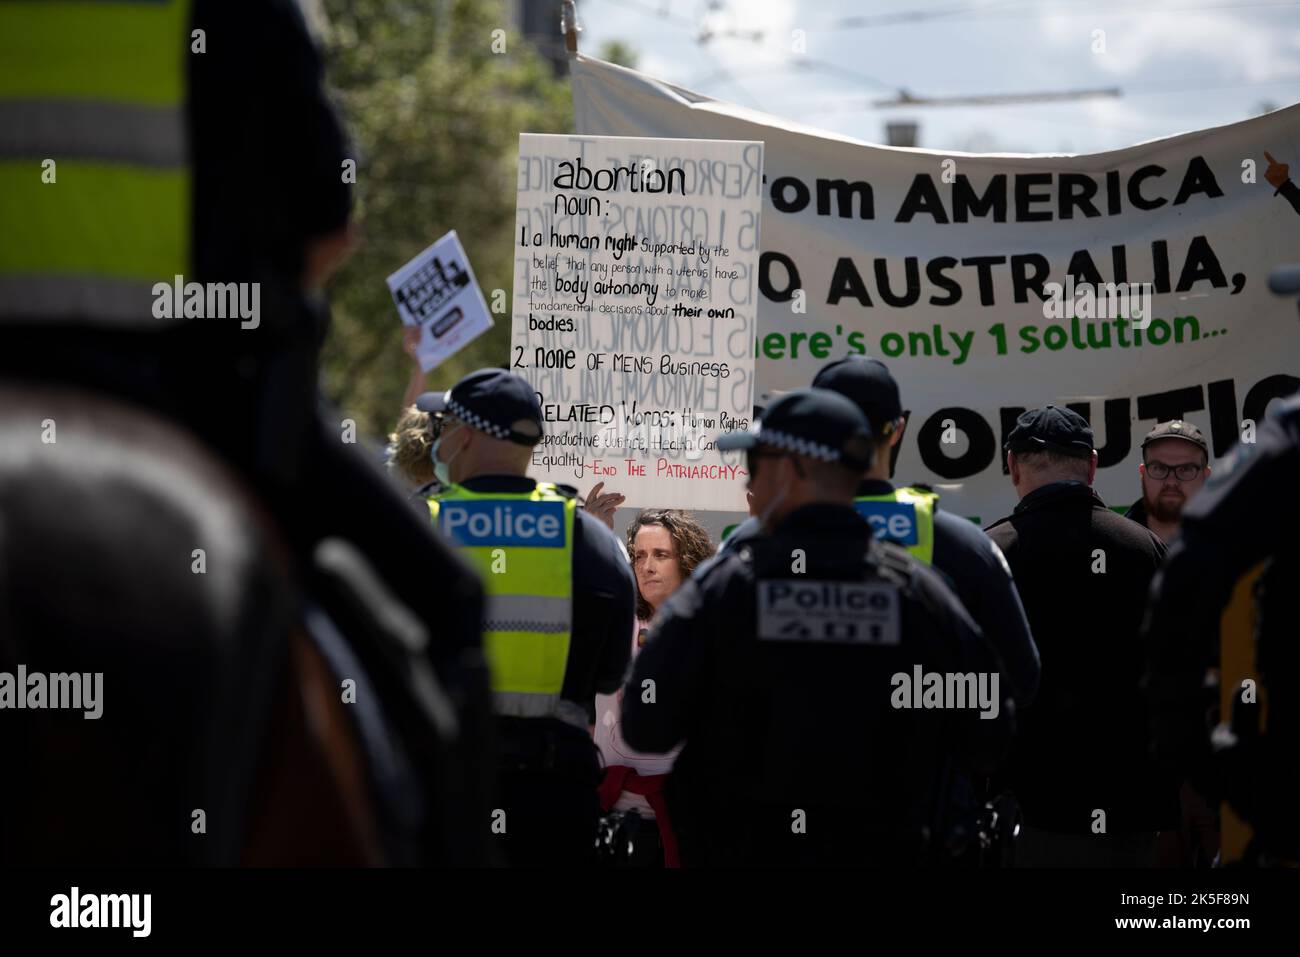 October 8th, 2022, Melbourne, Australia. A pro-abortion protester holds a sign in front of a police line at a counter-rally in response to MP Bernie Finn's March for the Babies, which happens annually. Credit: Jay Kogler/Alamy Live News Stock Photo